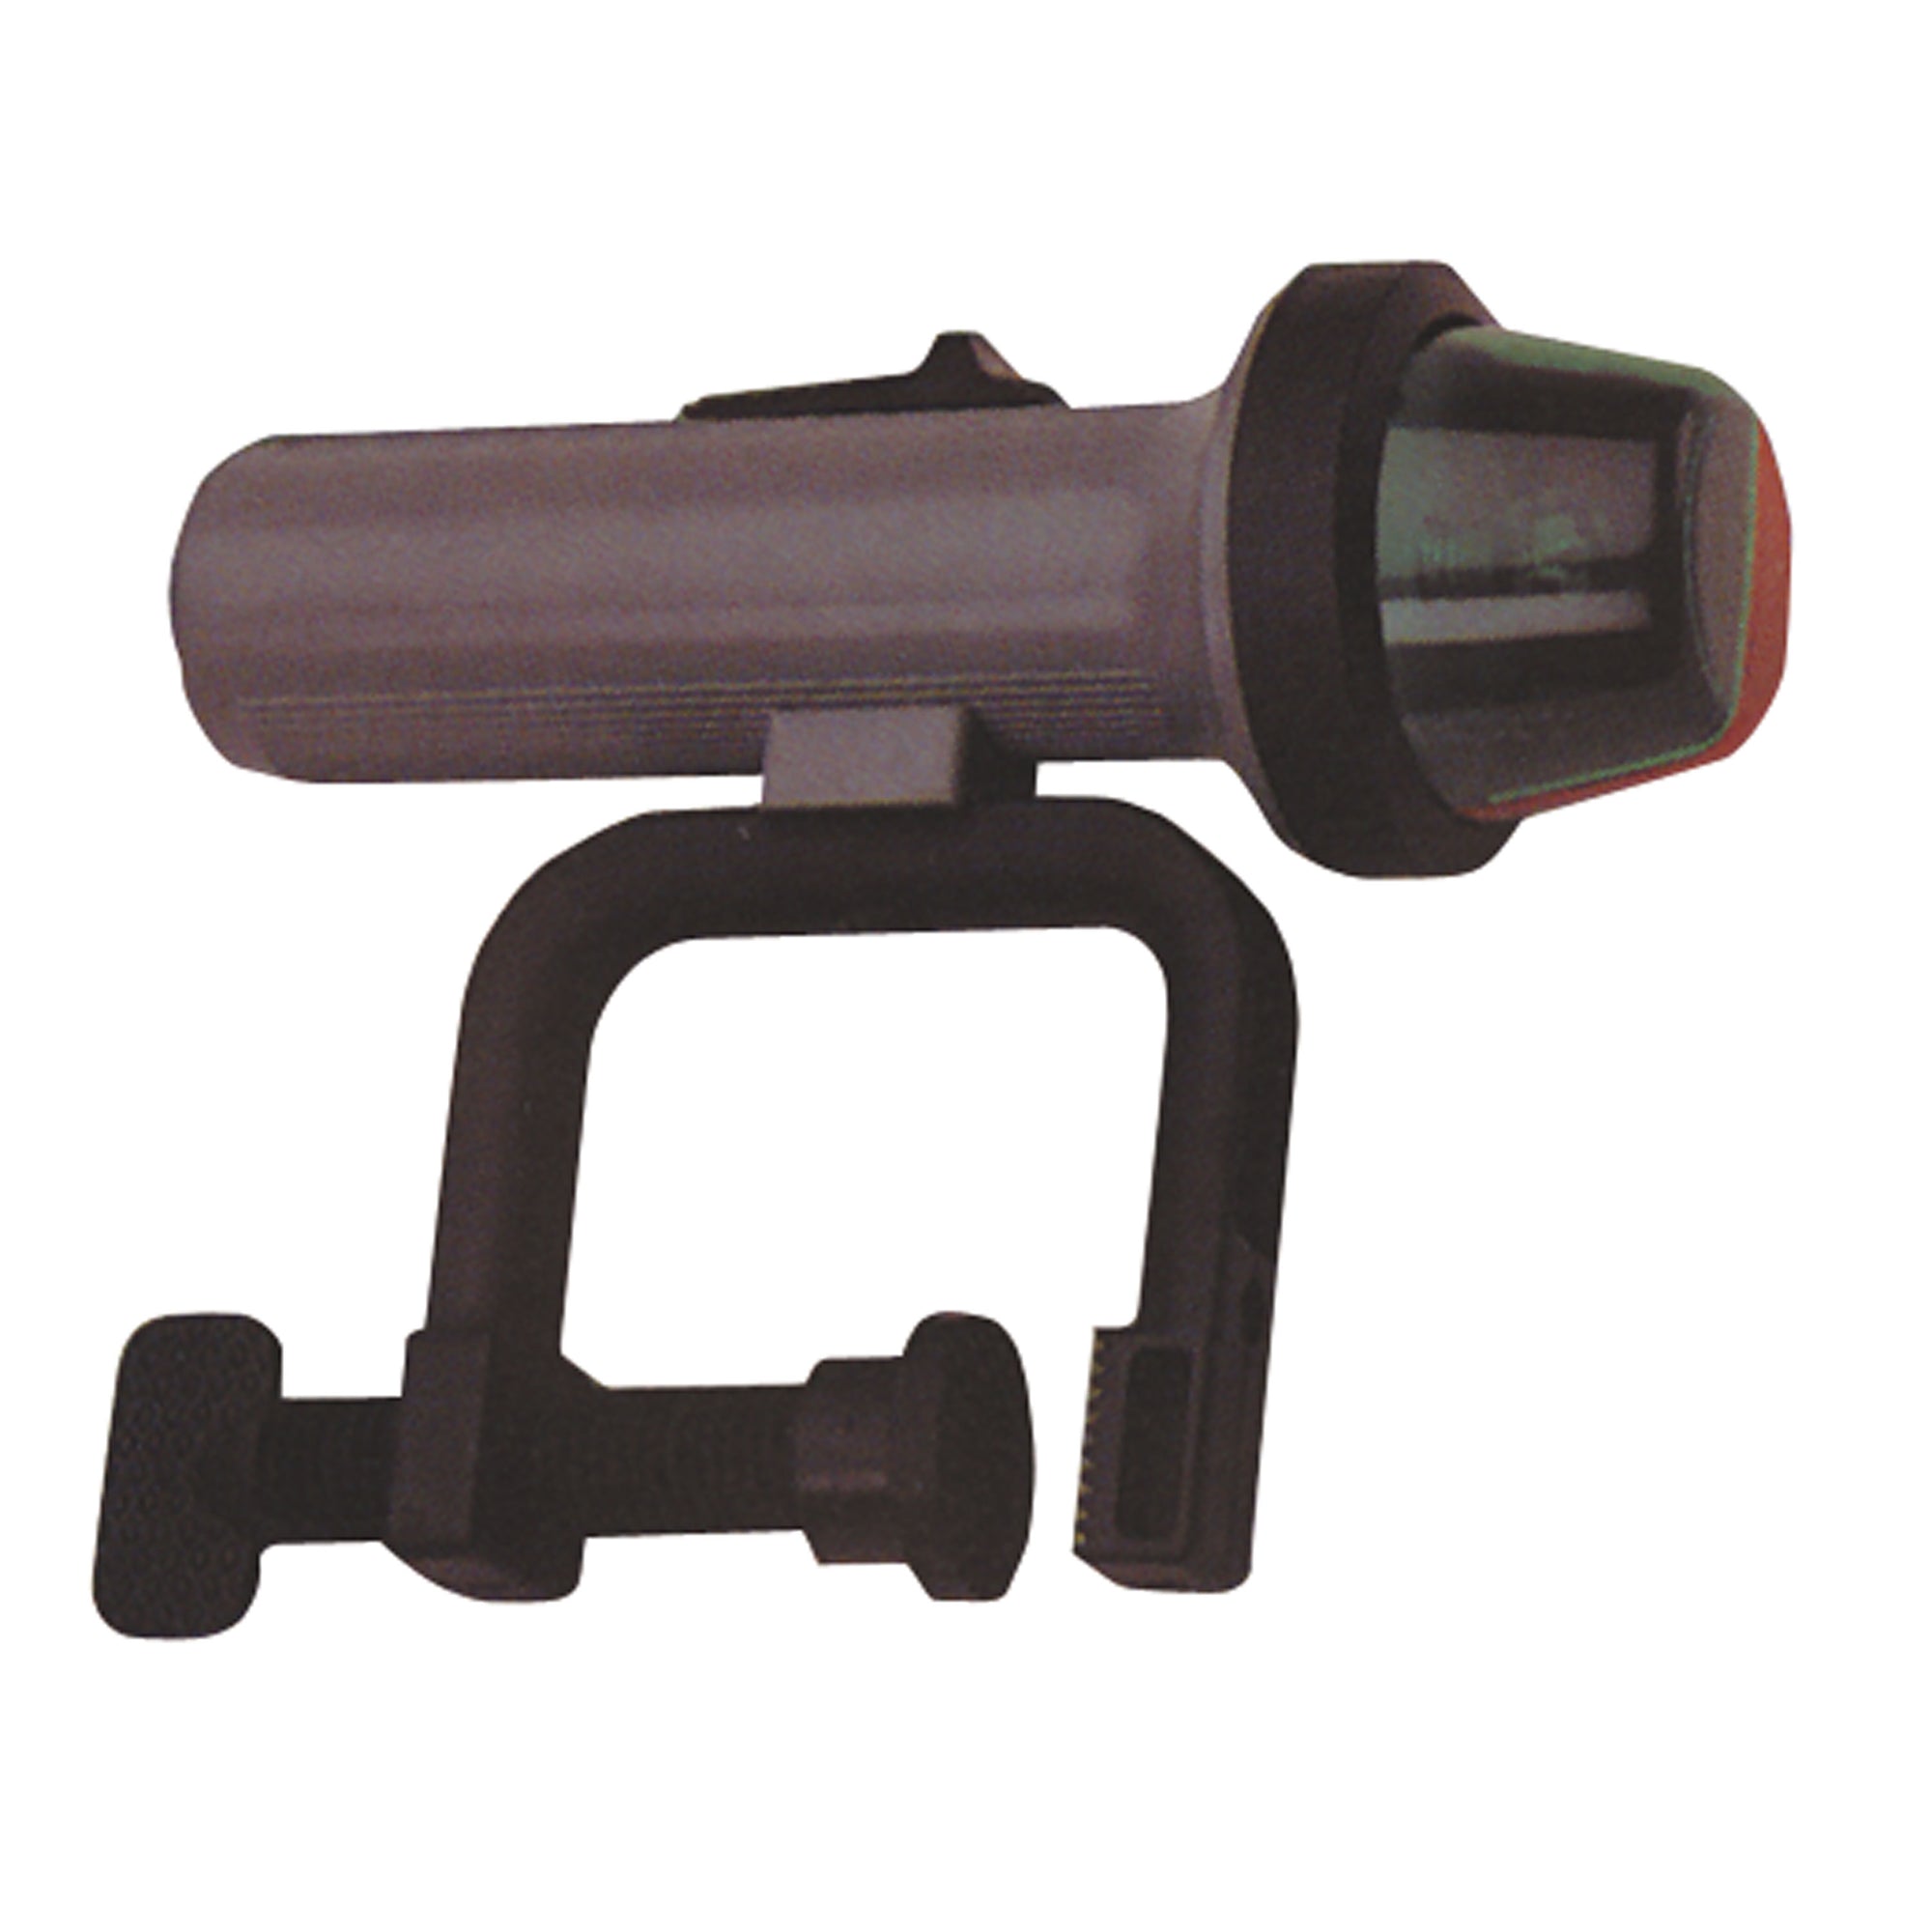 Fulton 52 PWR-CL Battery Operated Portable Bow Light with 'C' Clamp - Horizontal Mount